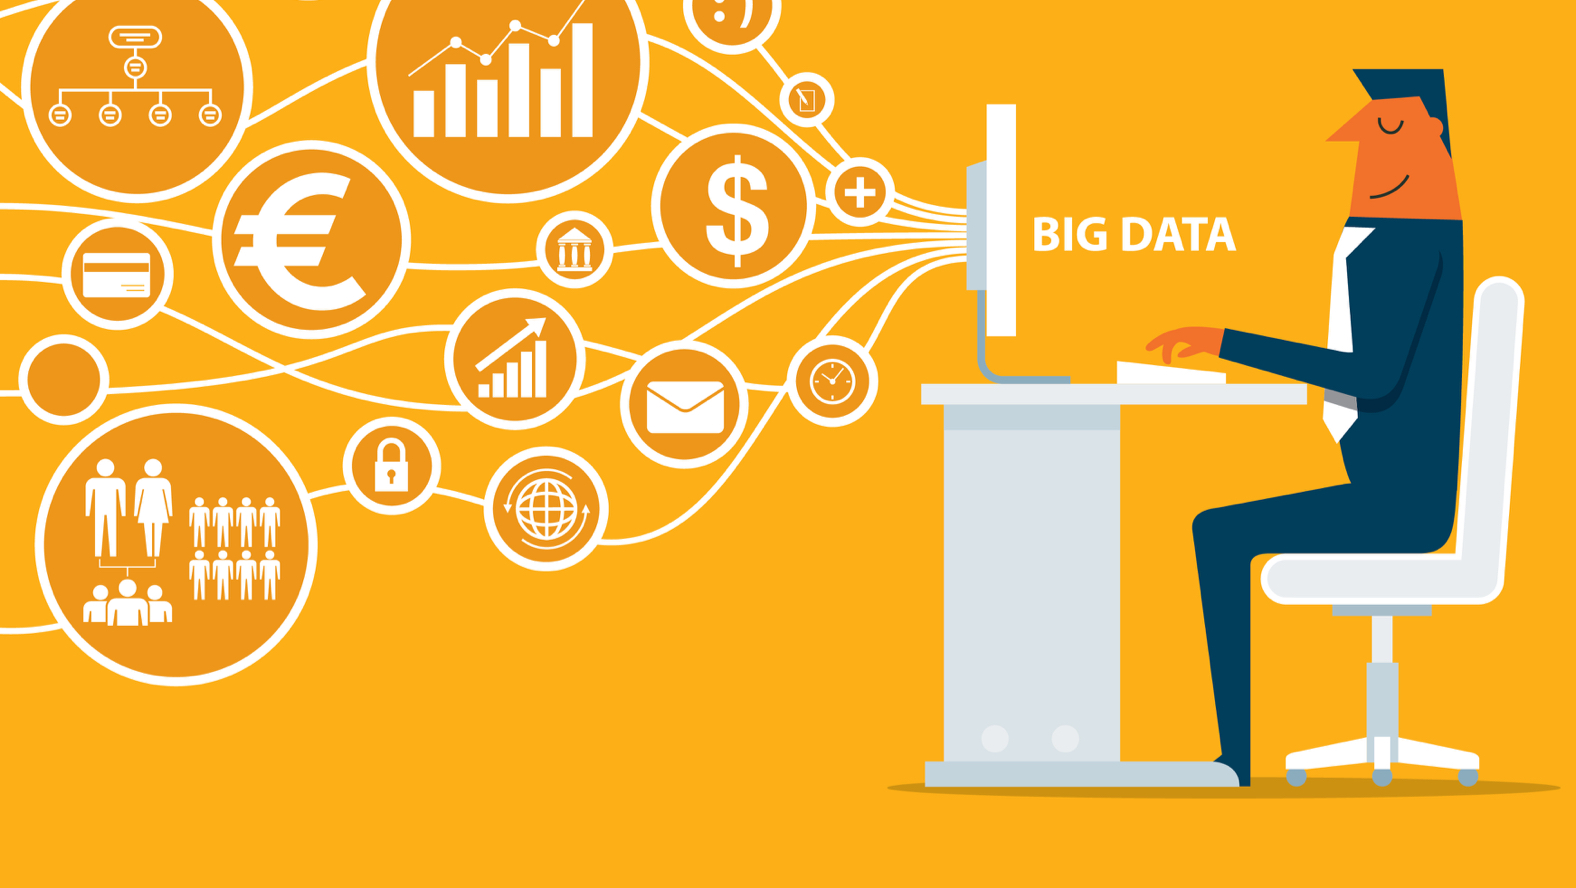 Revolutionising online personalisation with smarter data mining and analytics